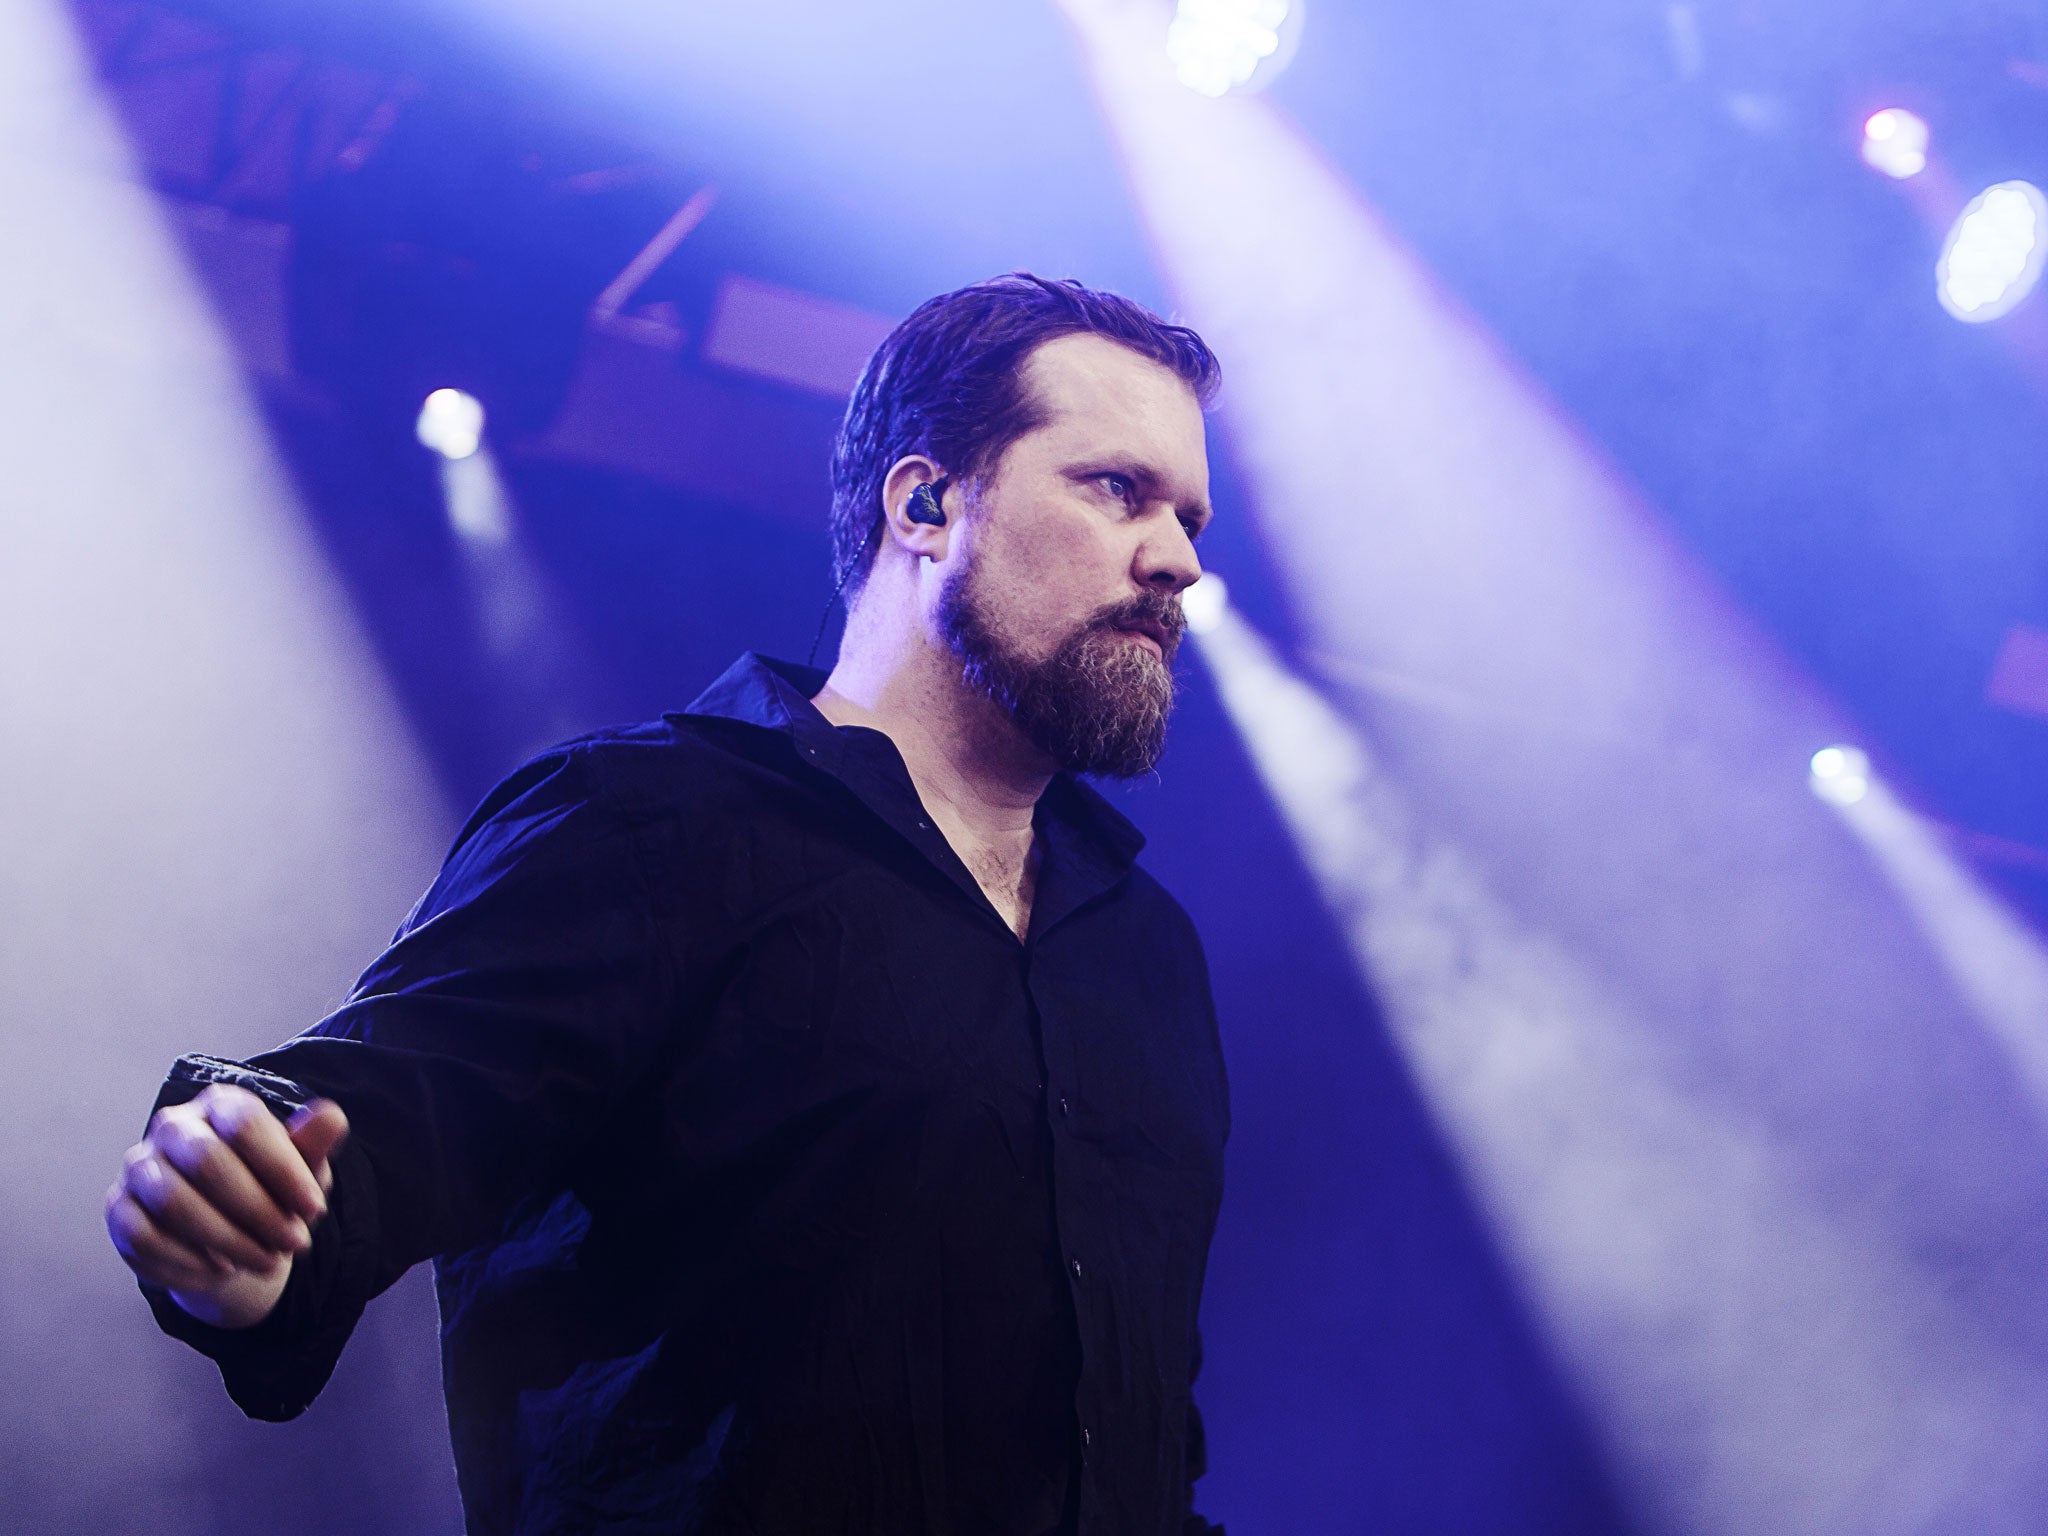 John Grant is well worth a watch at Glastonbury Festival 2014